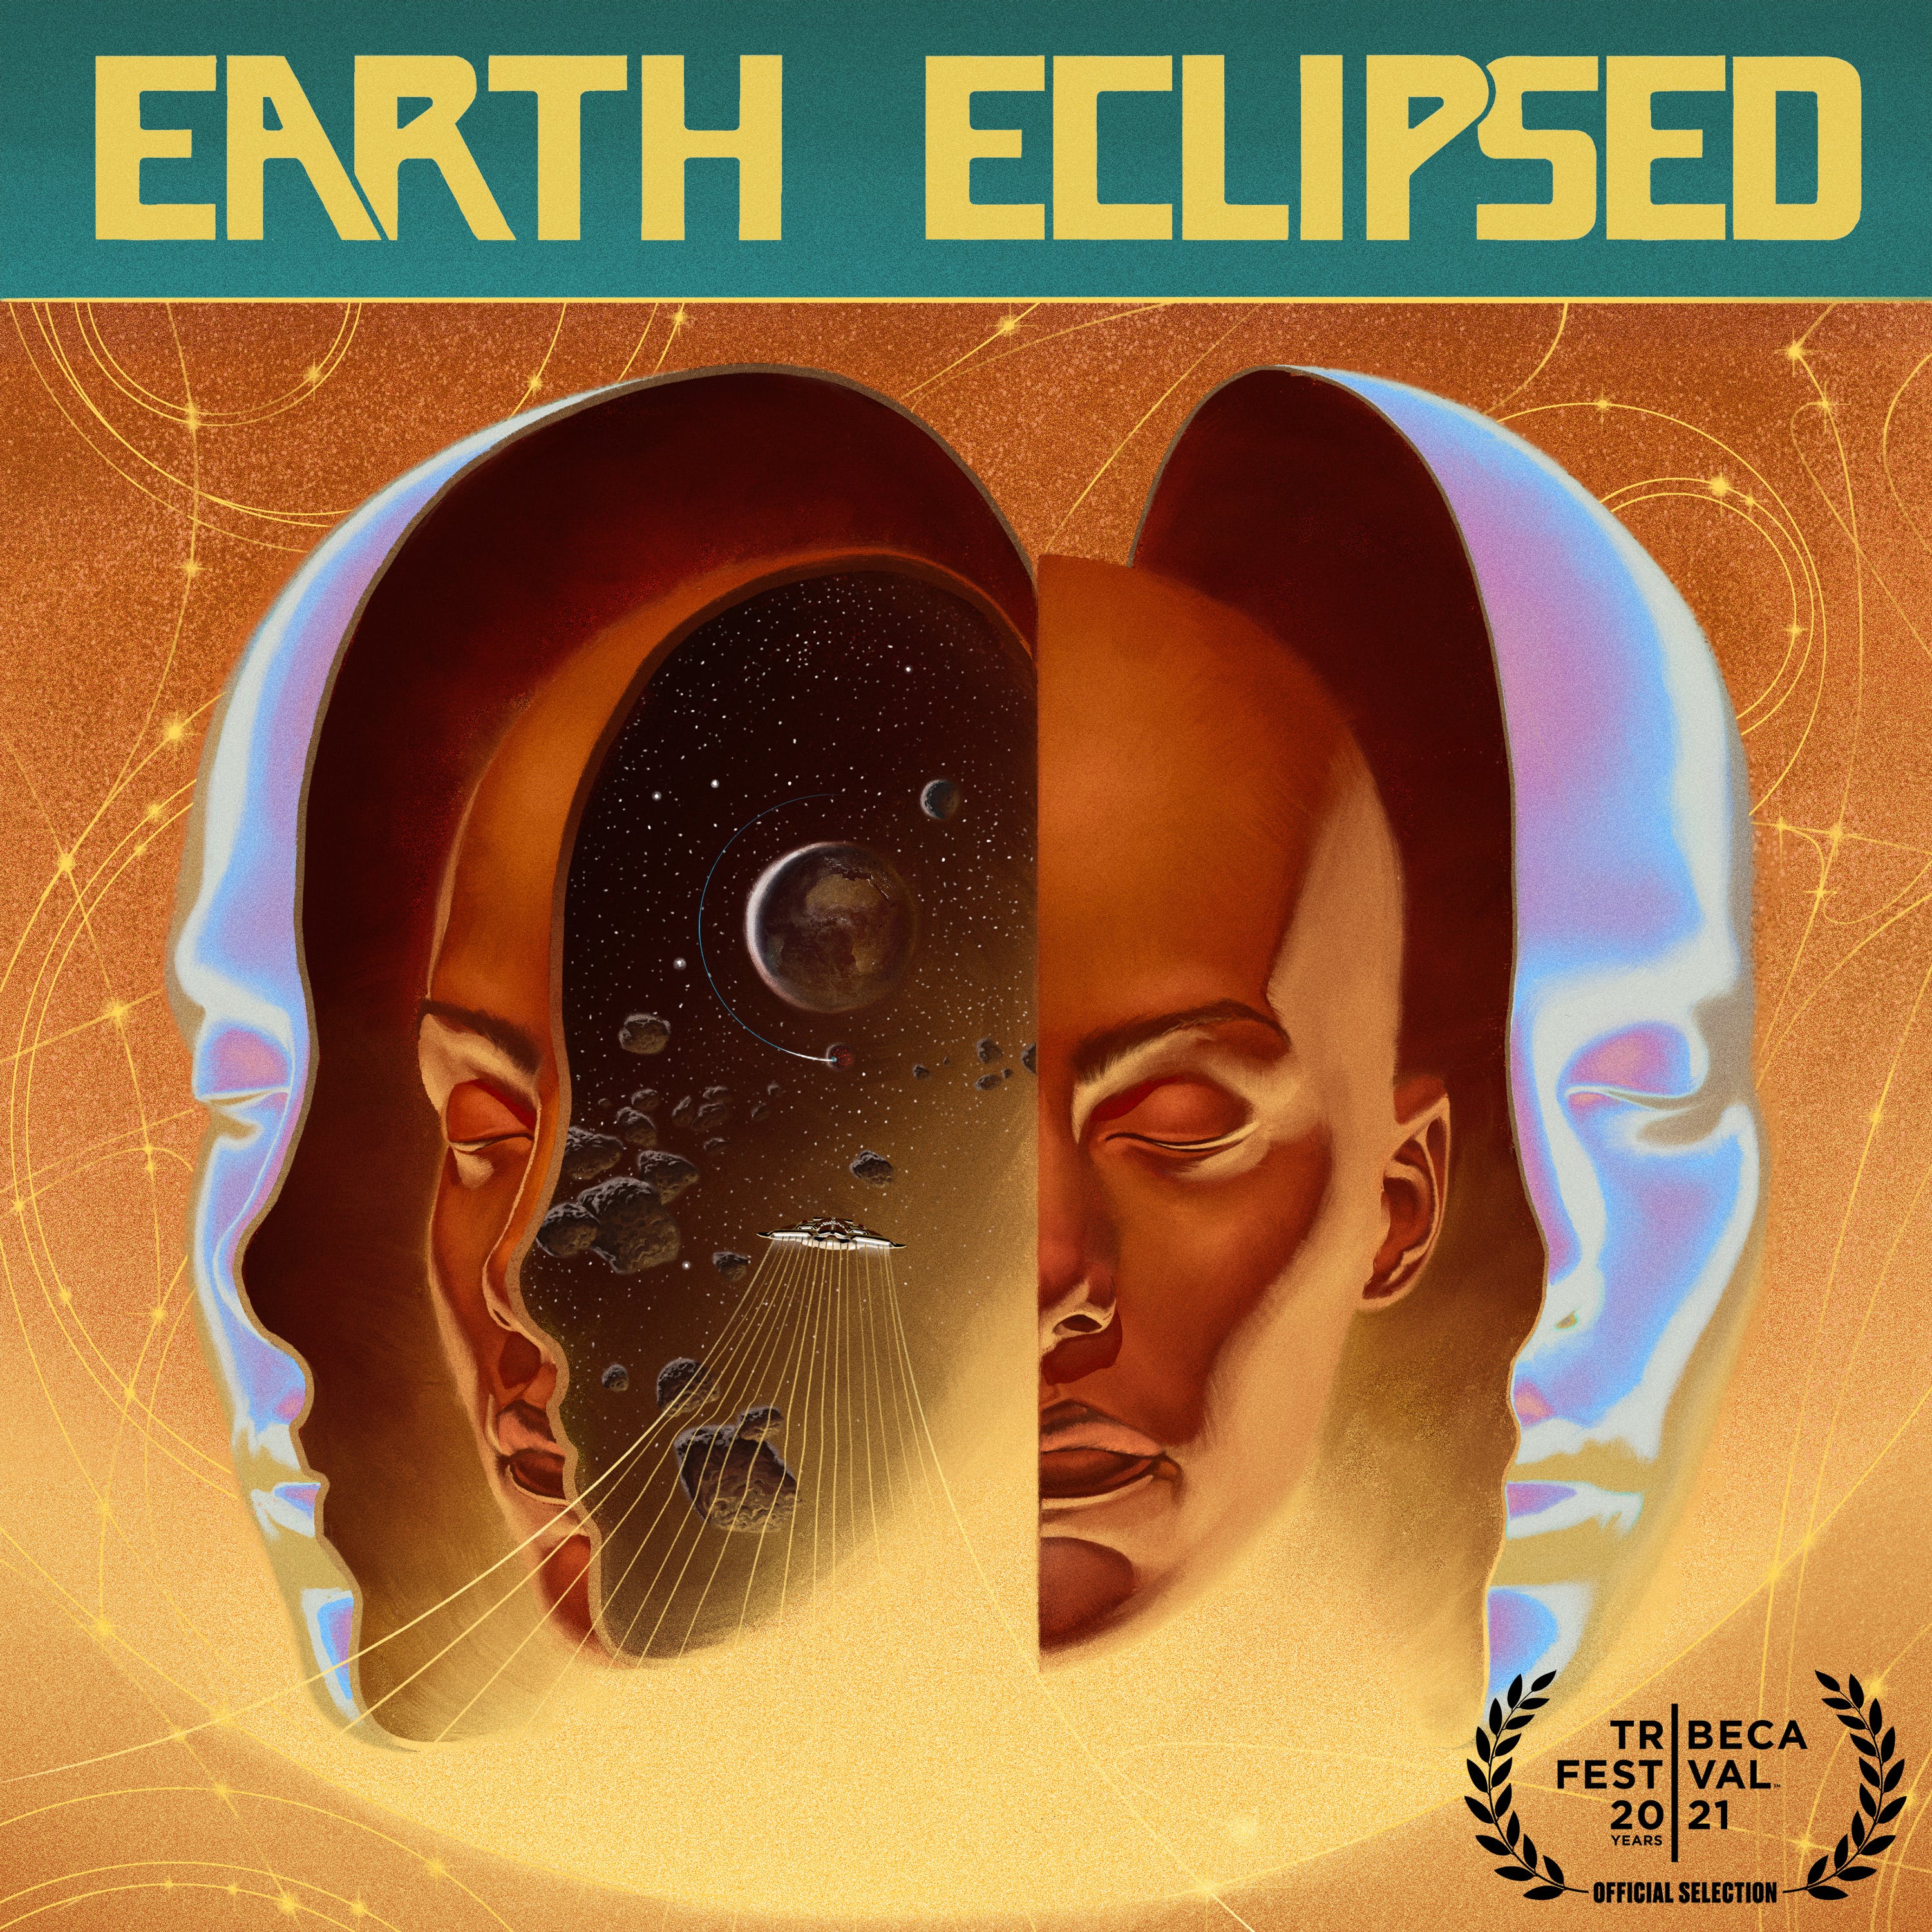 Earth Eclipsed